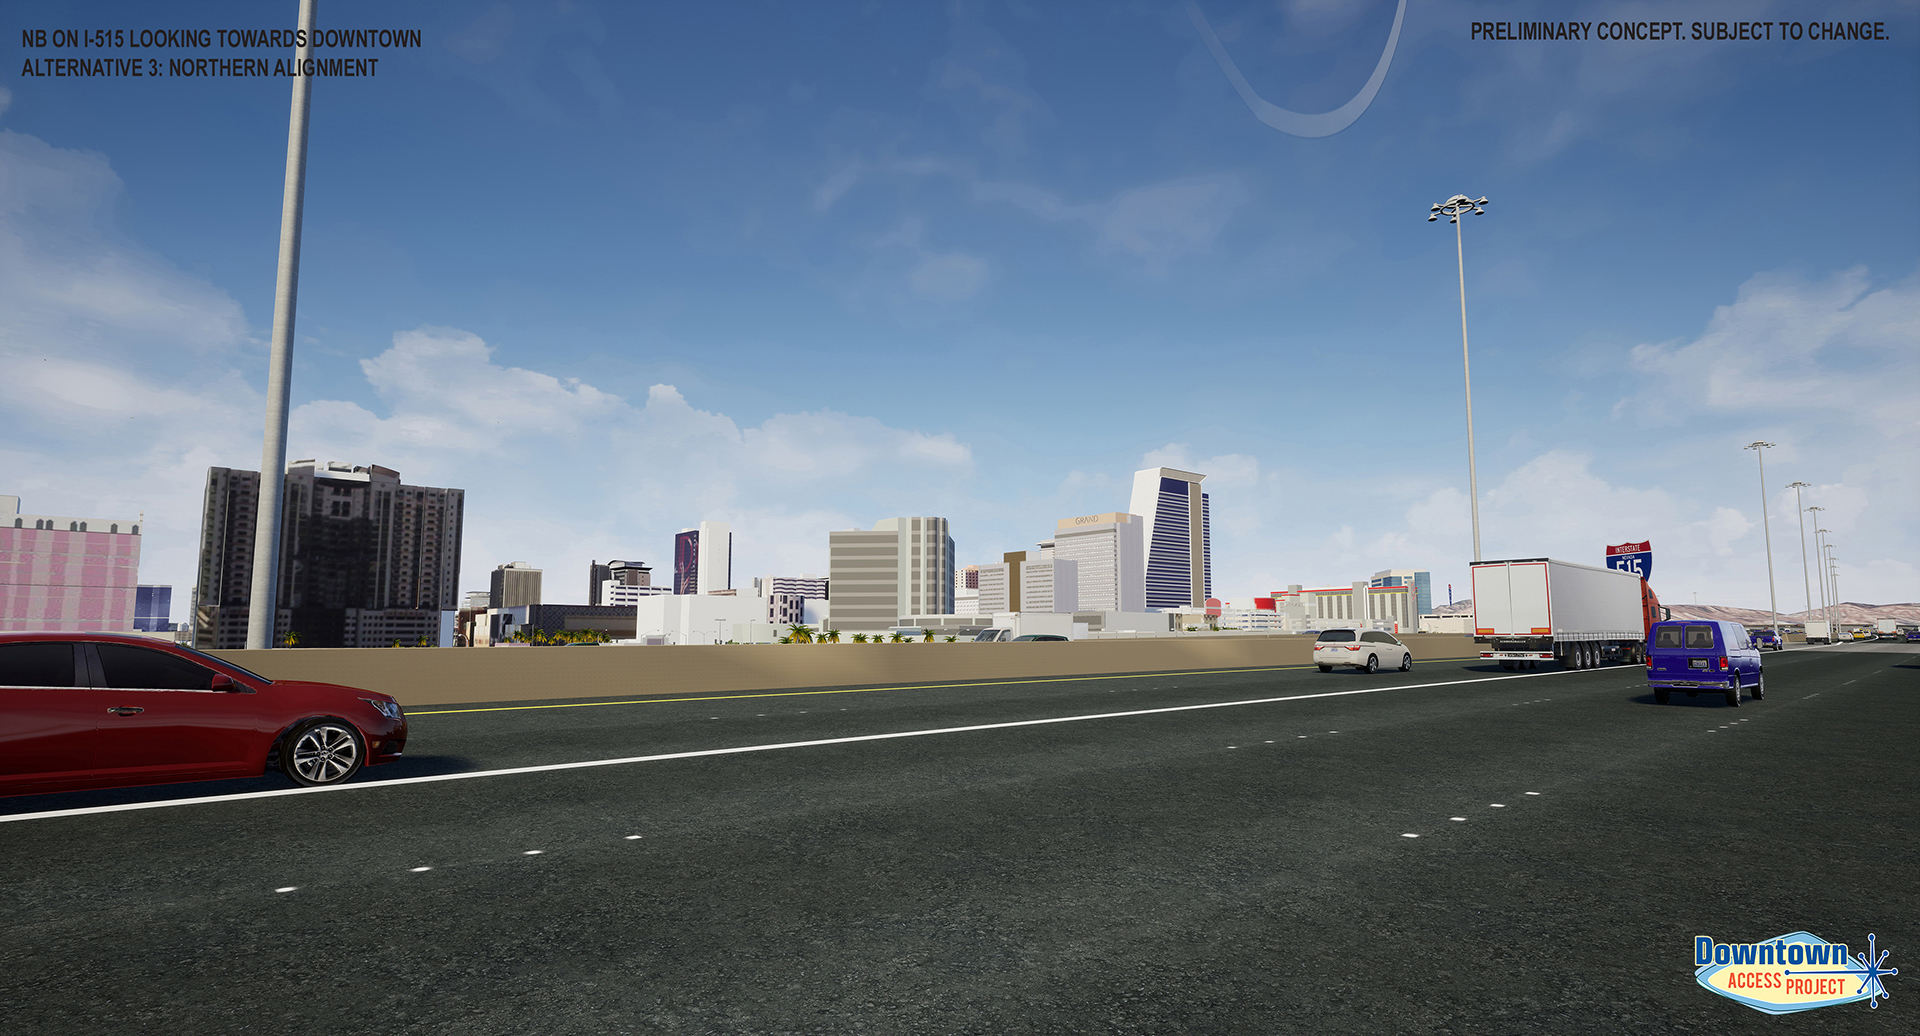 Driver View of Downtown from Proposed Design Alternatives